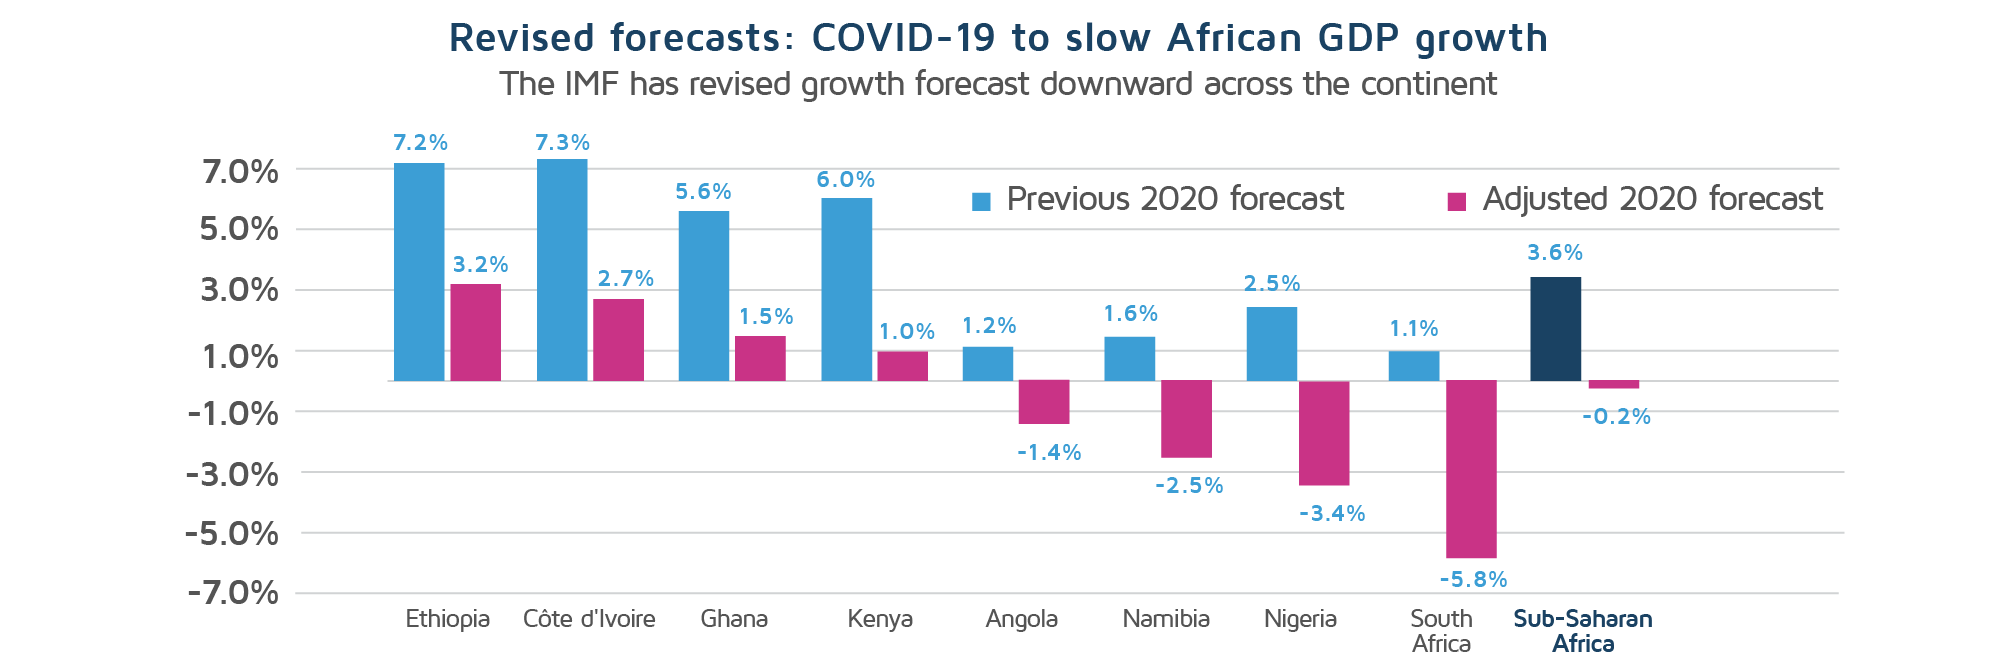 development_Revised forecasts_COVID-19 to slow African GDP growth